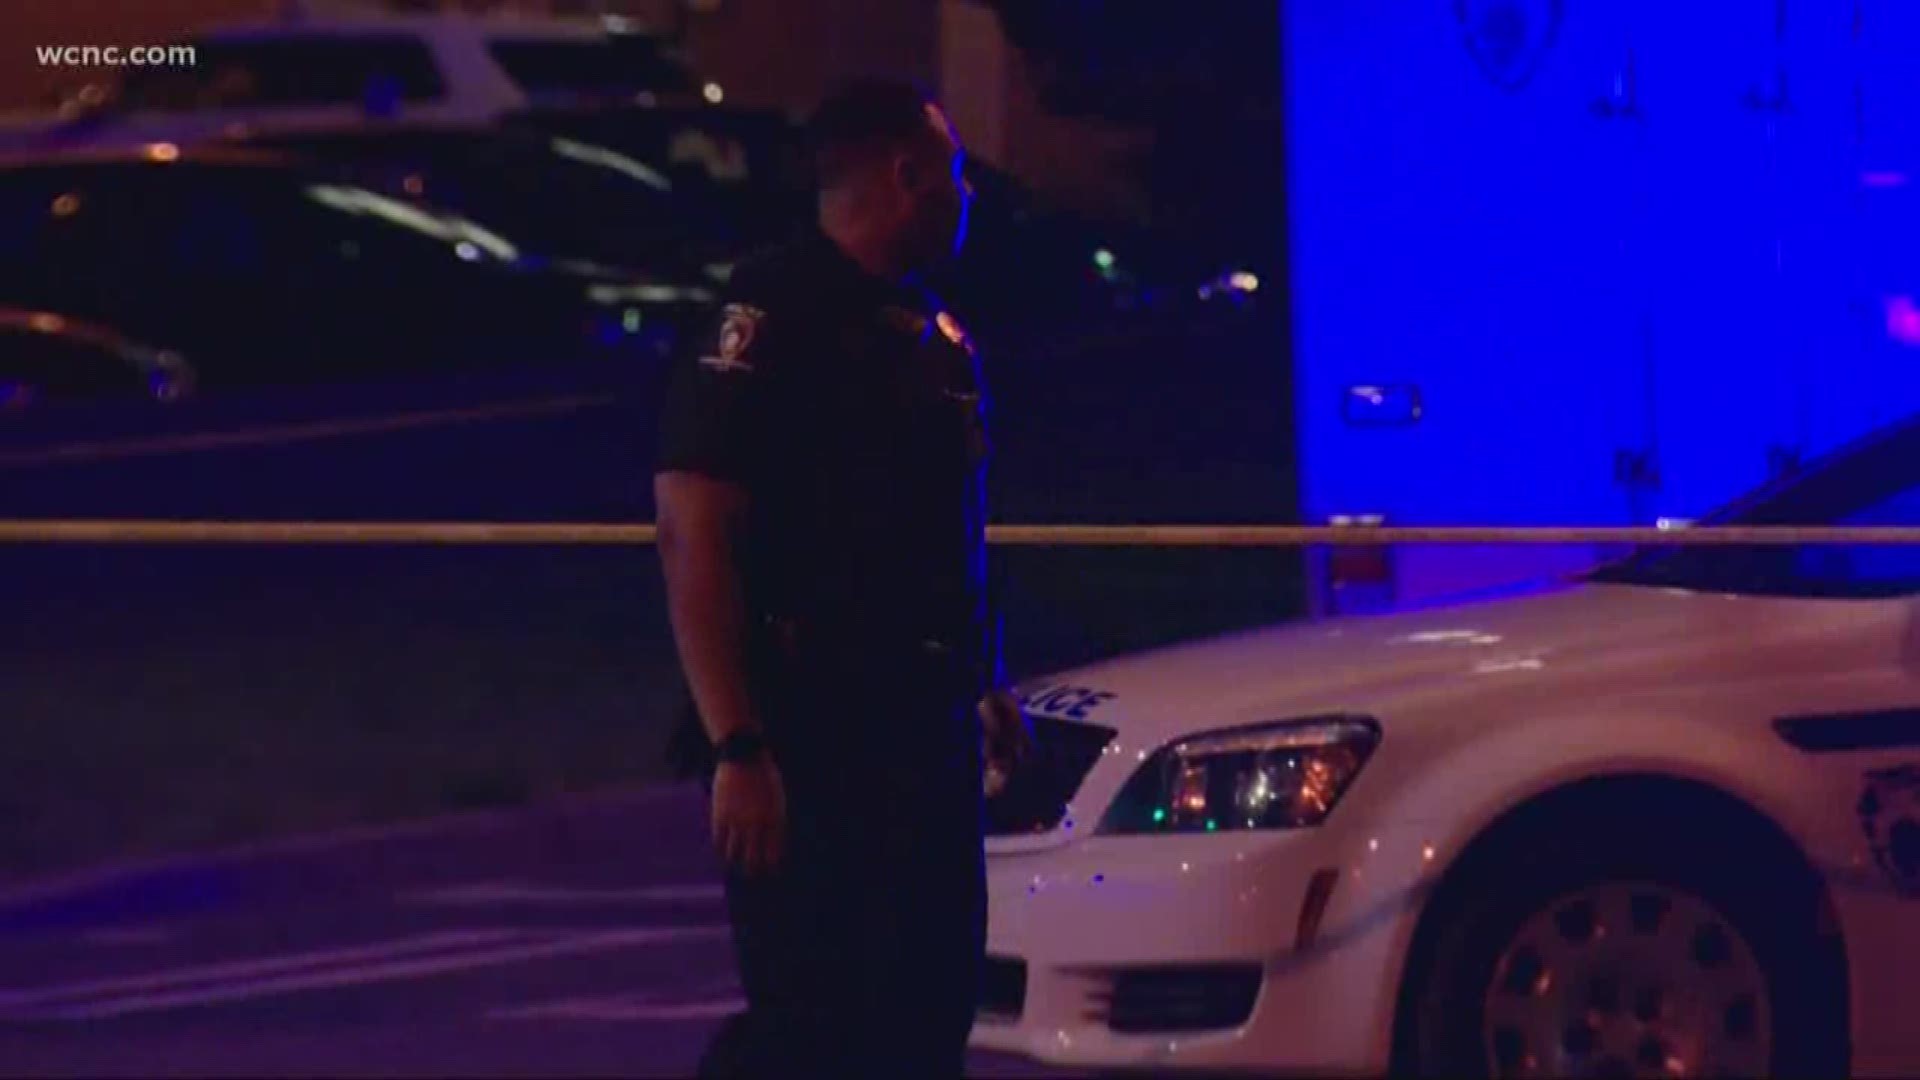 CMPD discovered four people shot in all. One of those shot, 24-year-old Calvin Haines, has died.